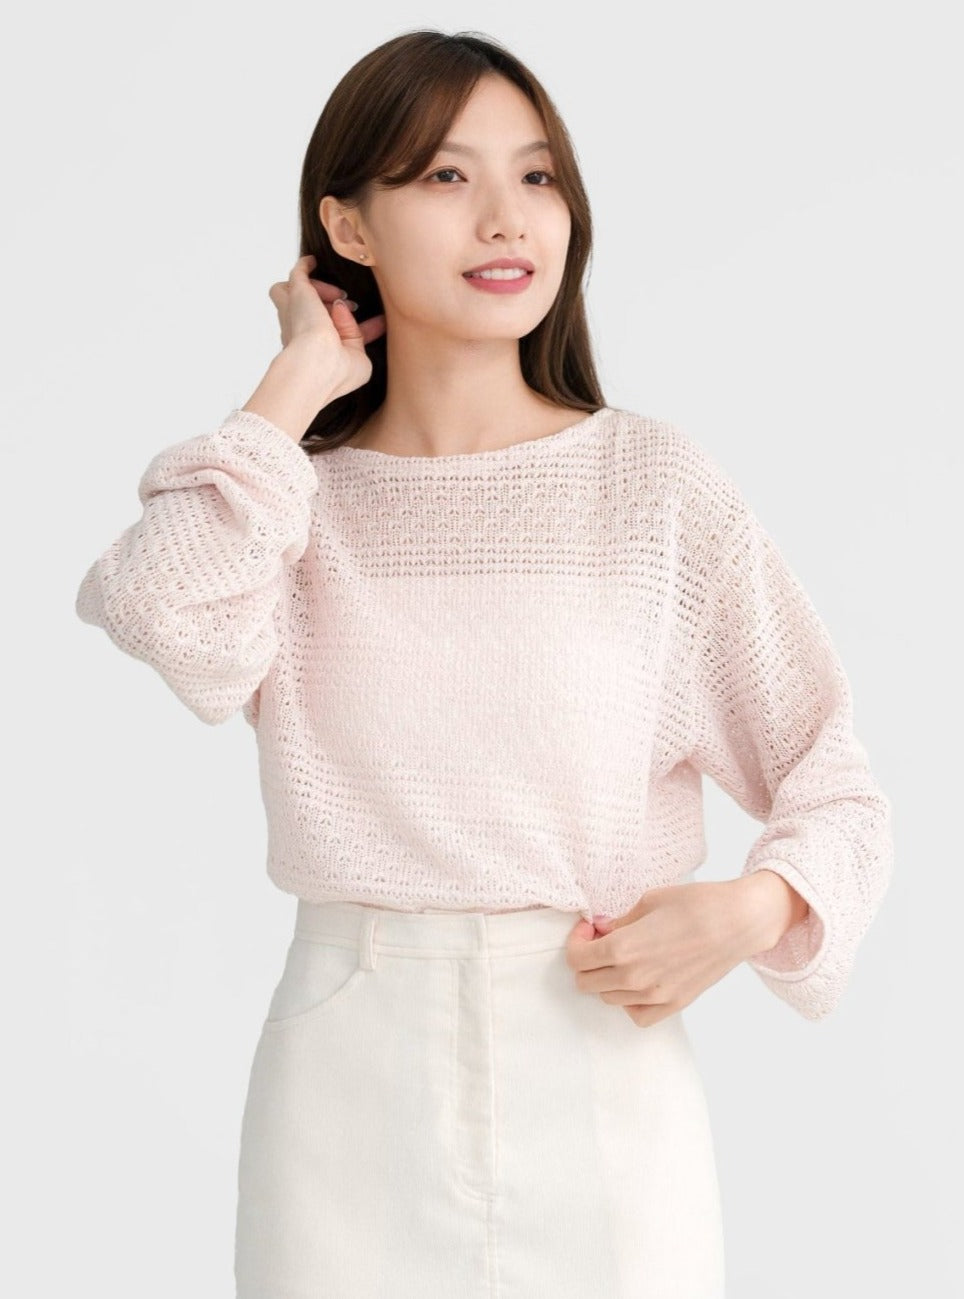 Two-Way Tie Neck Crochet Top - DAG-DD1393-24SoftPinkS - Soft Pink - S - D'zage Designs